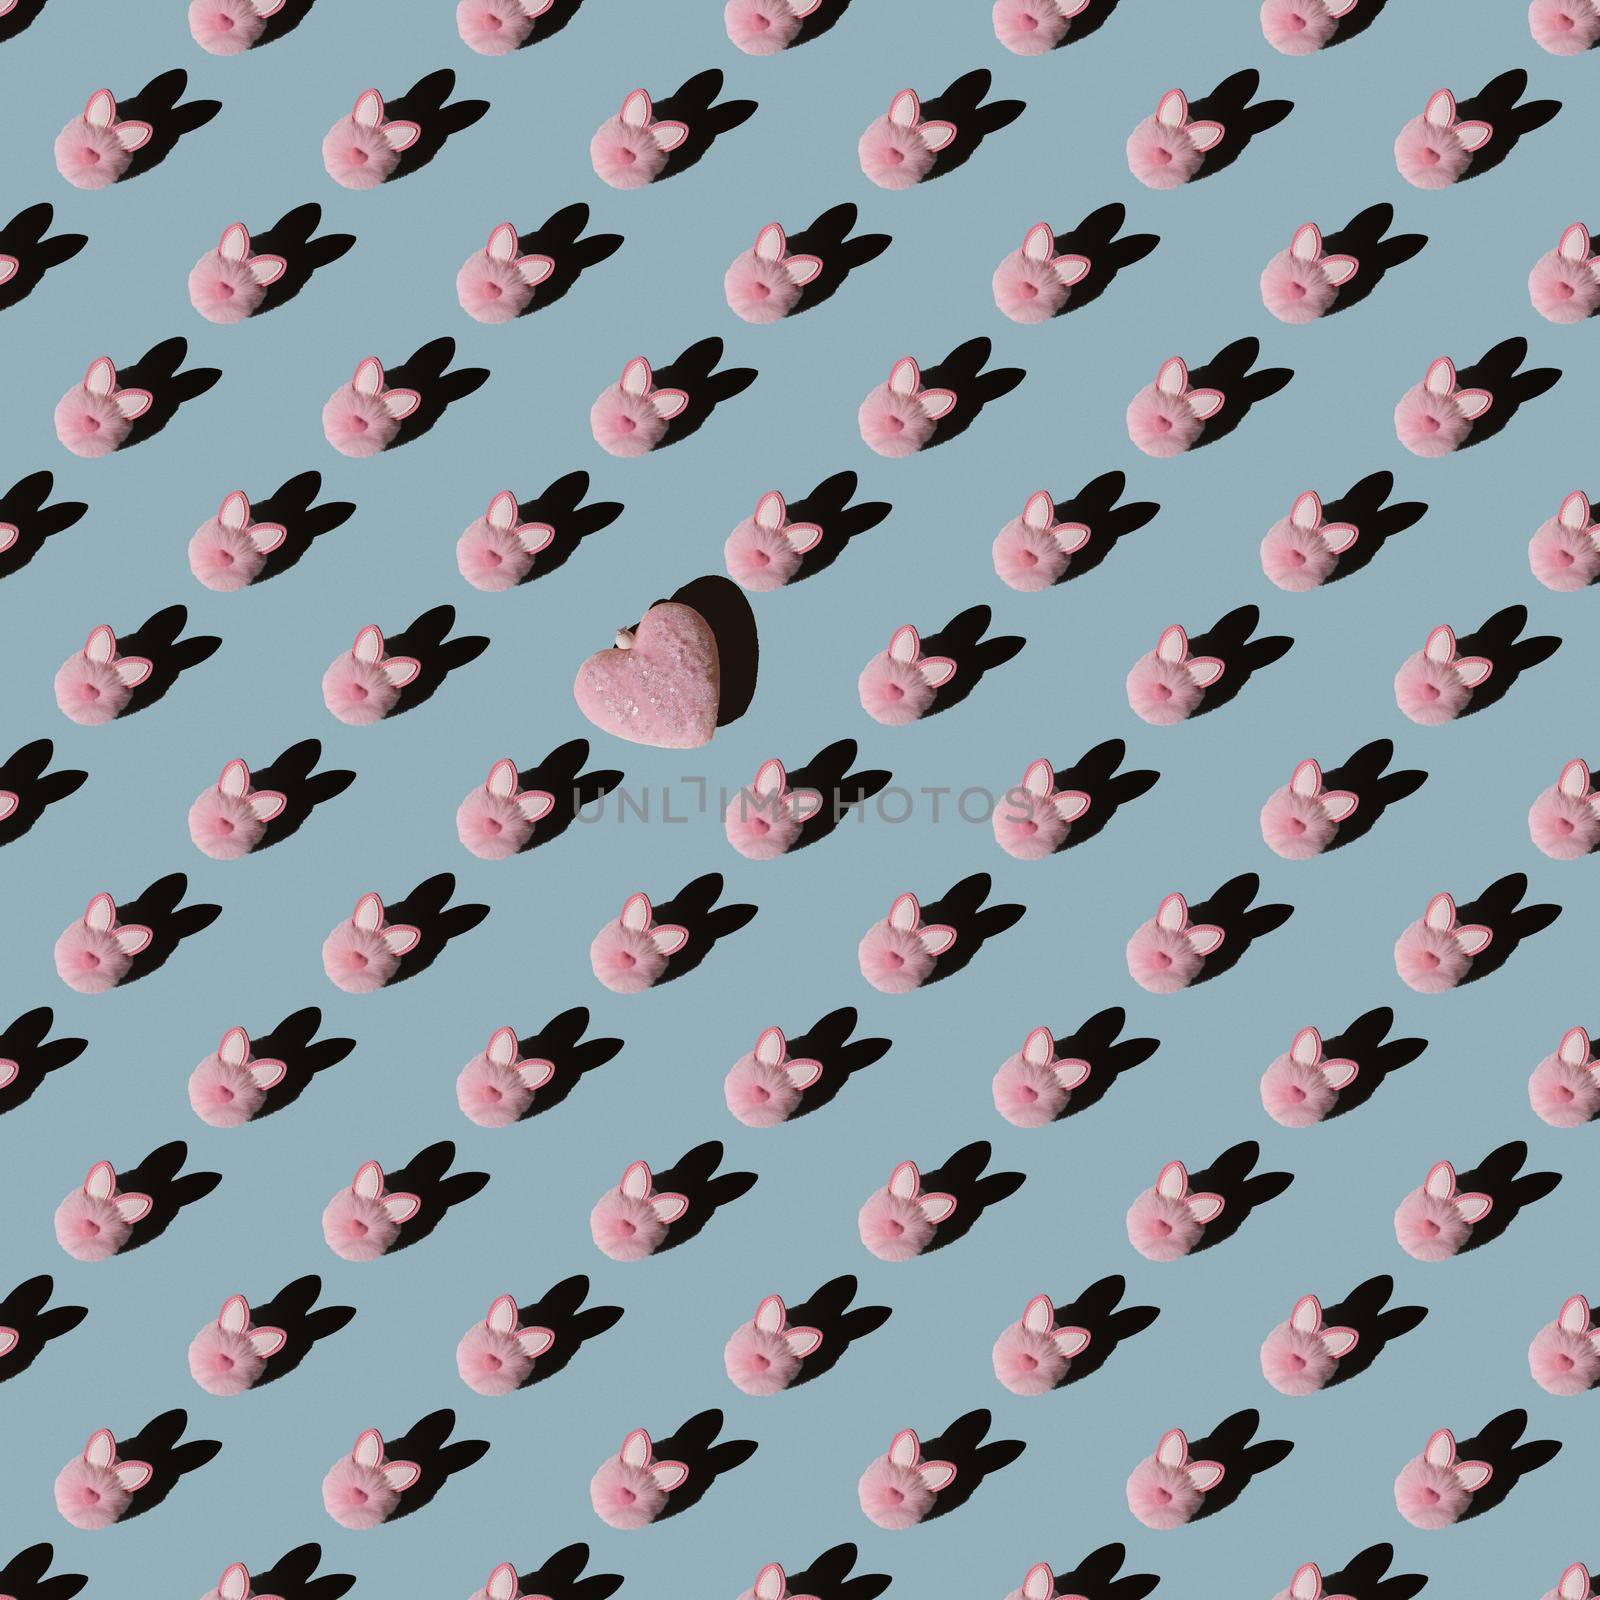 Easter pattern, pink bunny on a blue background. Flat composition with decorative hearts.